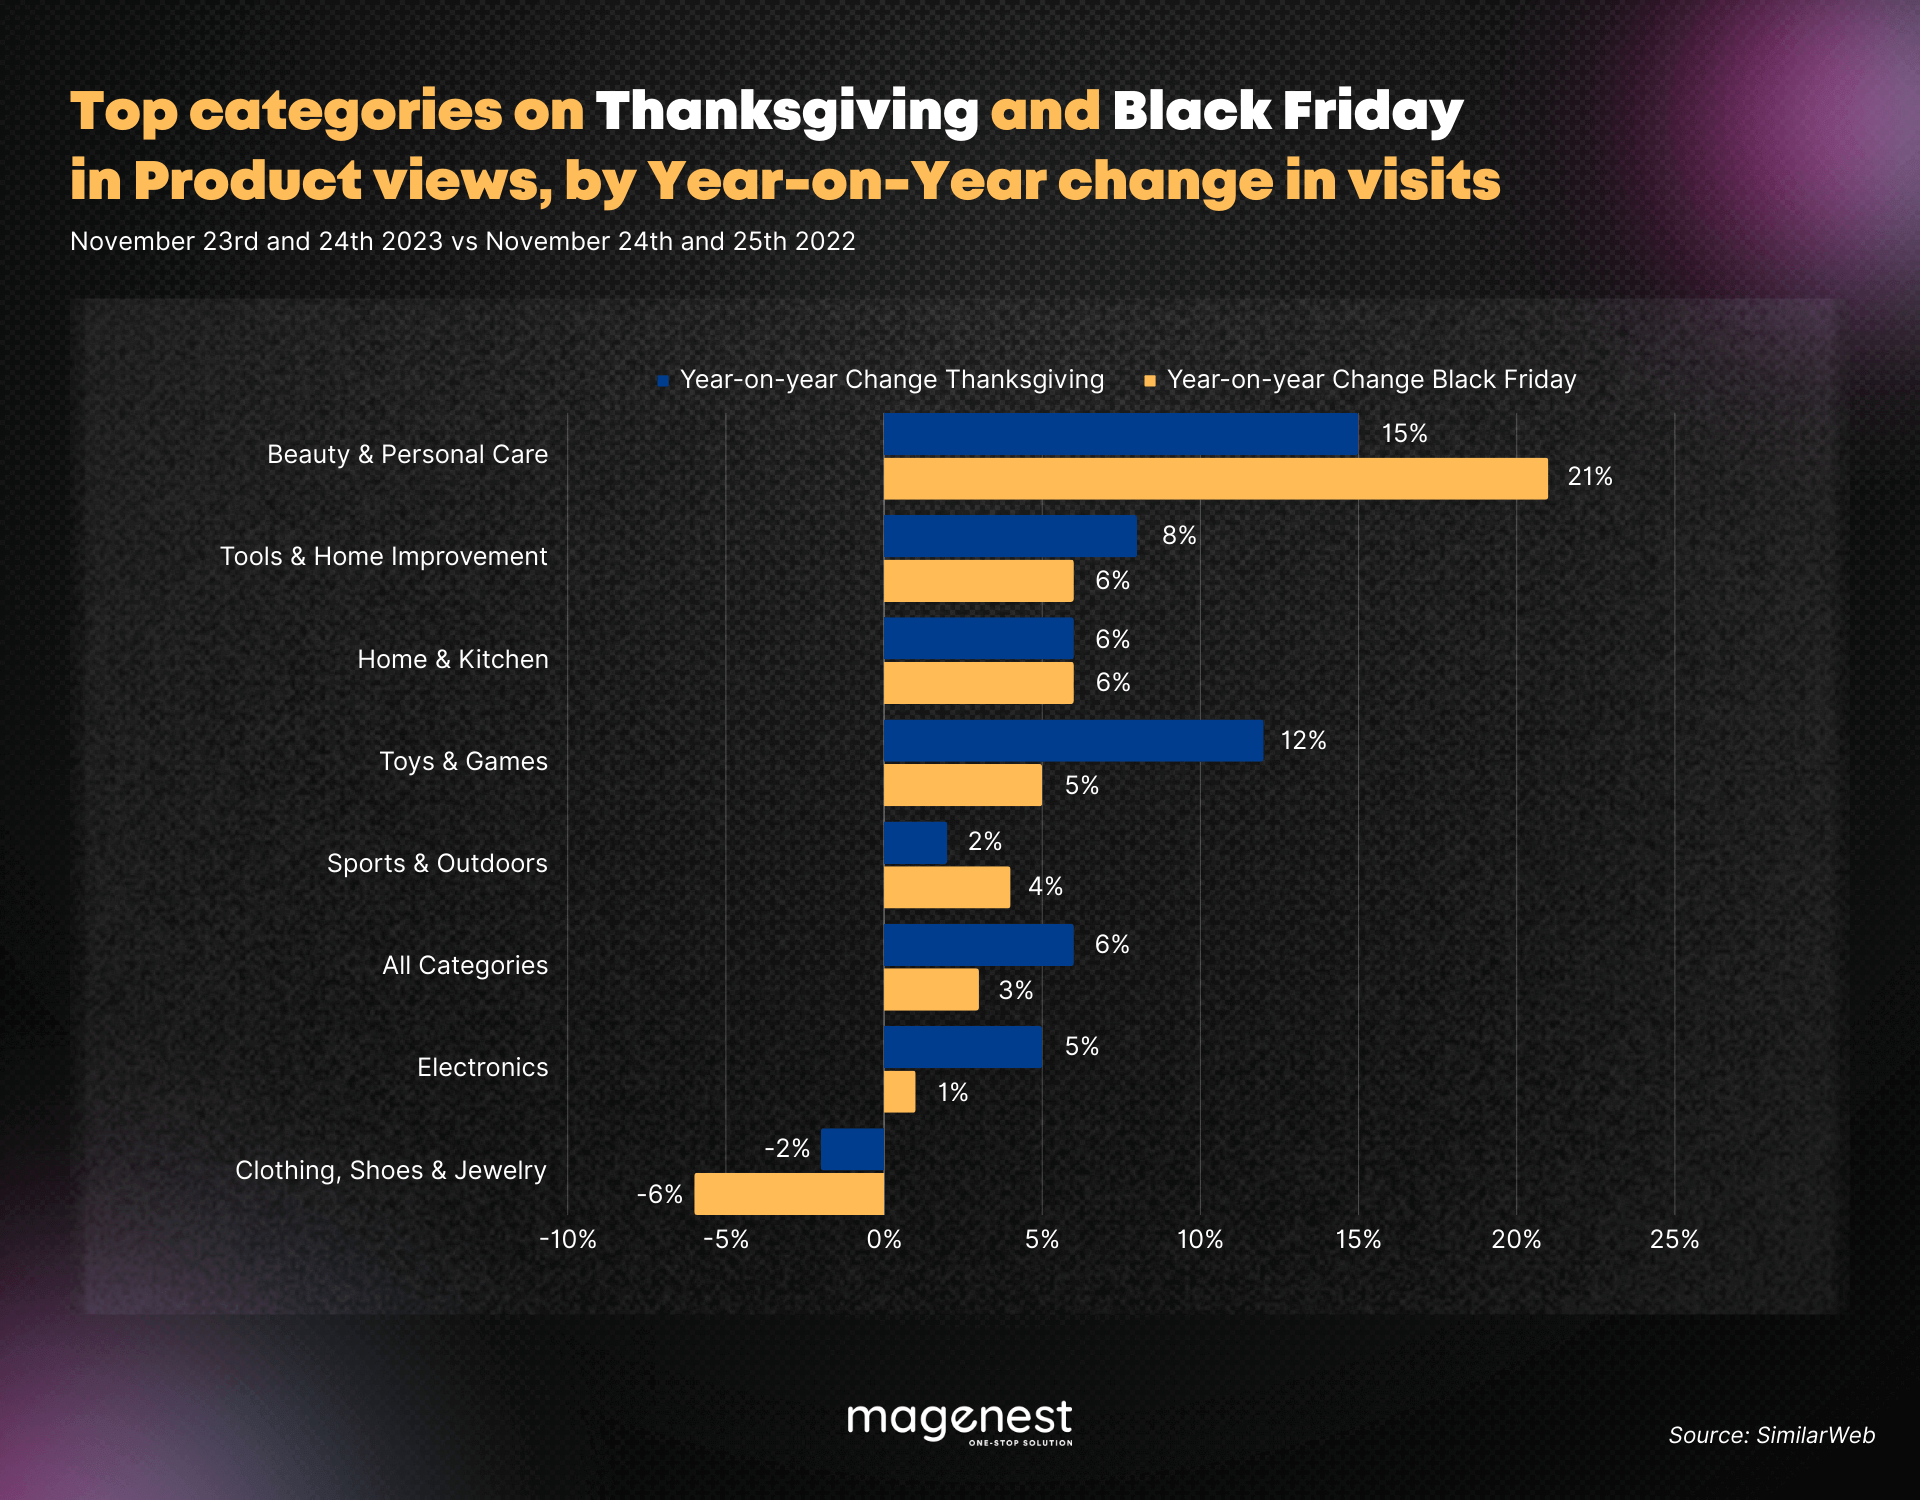 Top categories on Thanksgiving and Black Friday in Product views, by Year-on-Year change in visits to Amazon